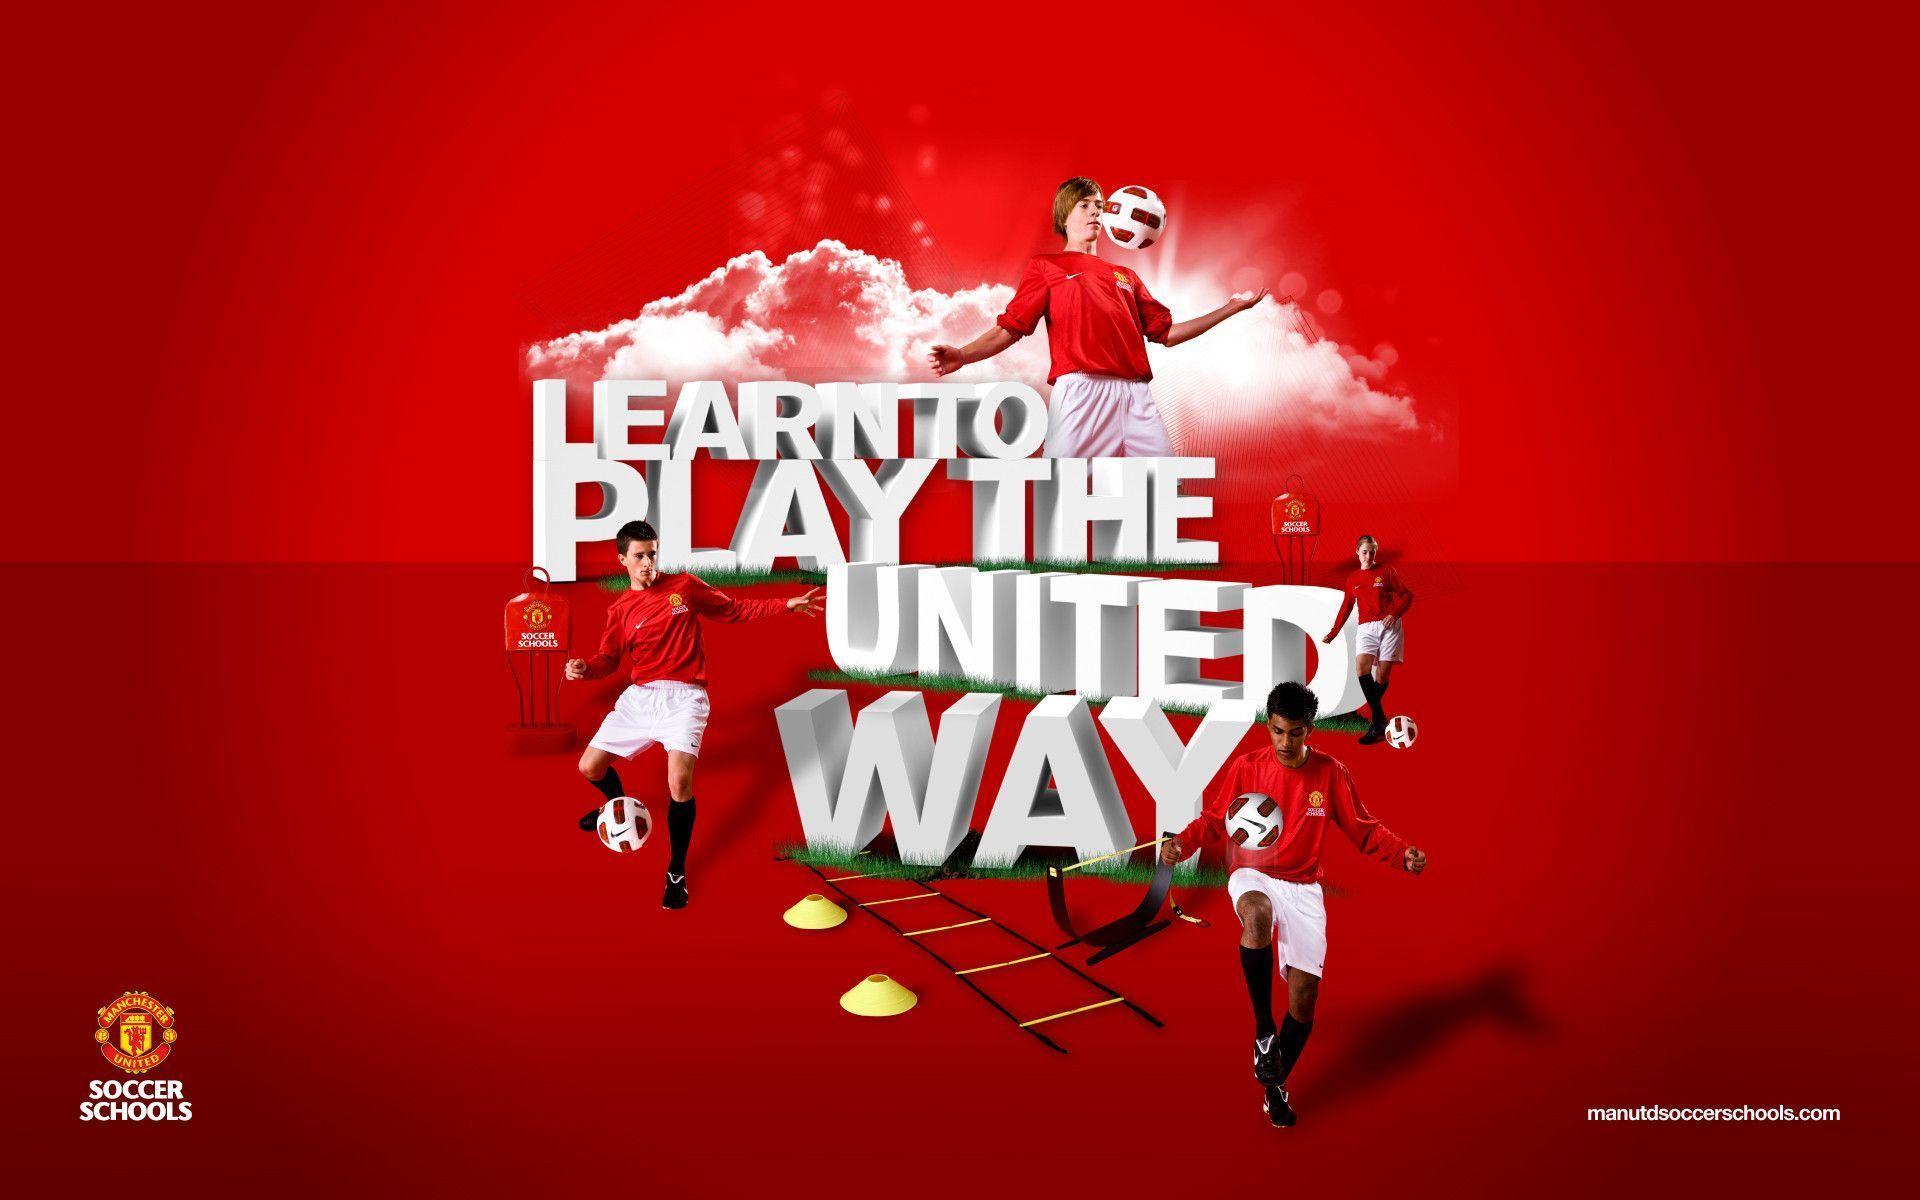 Beloved Manchester United wallpapers and image